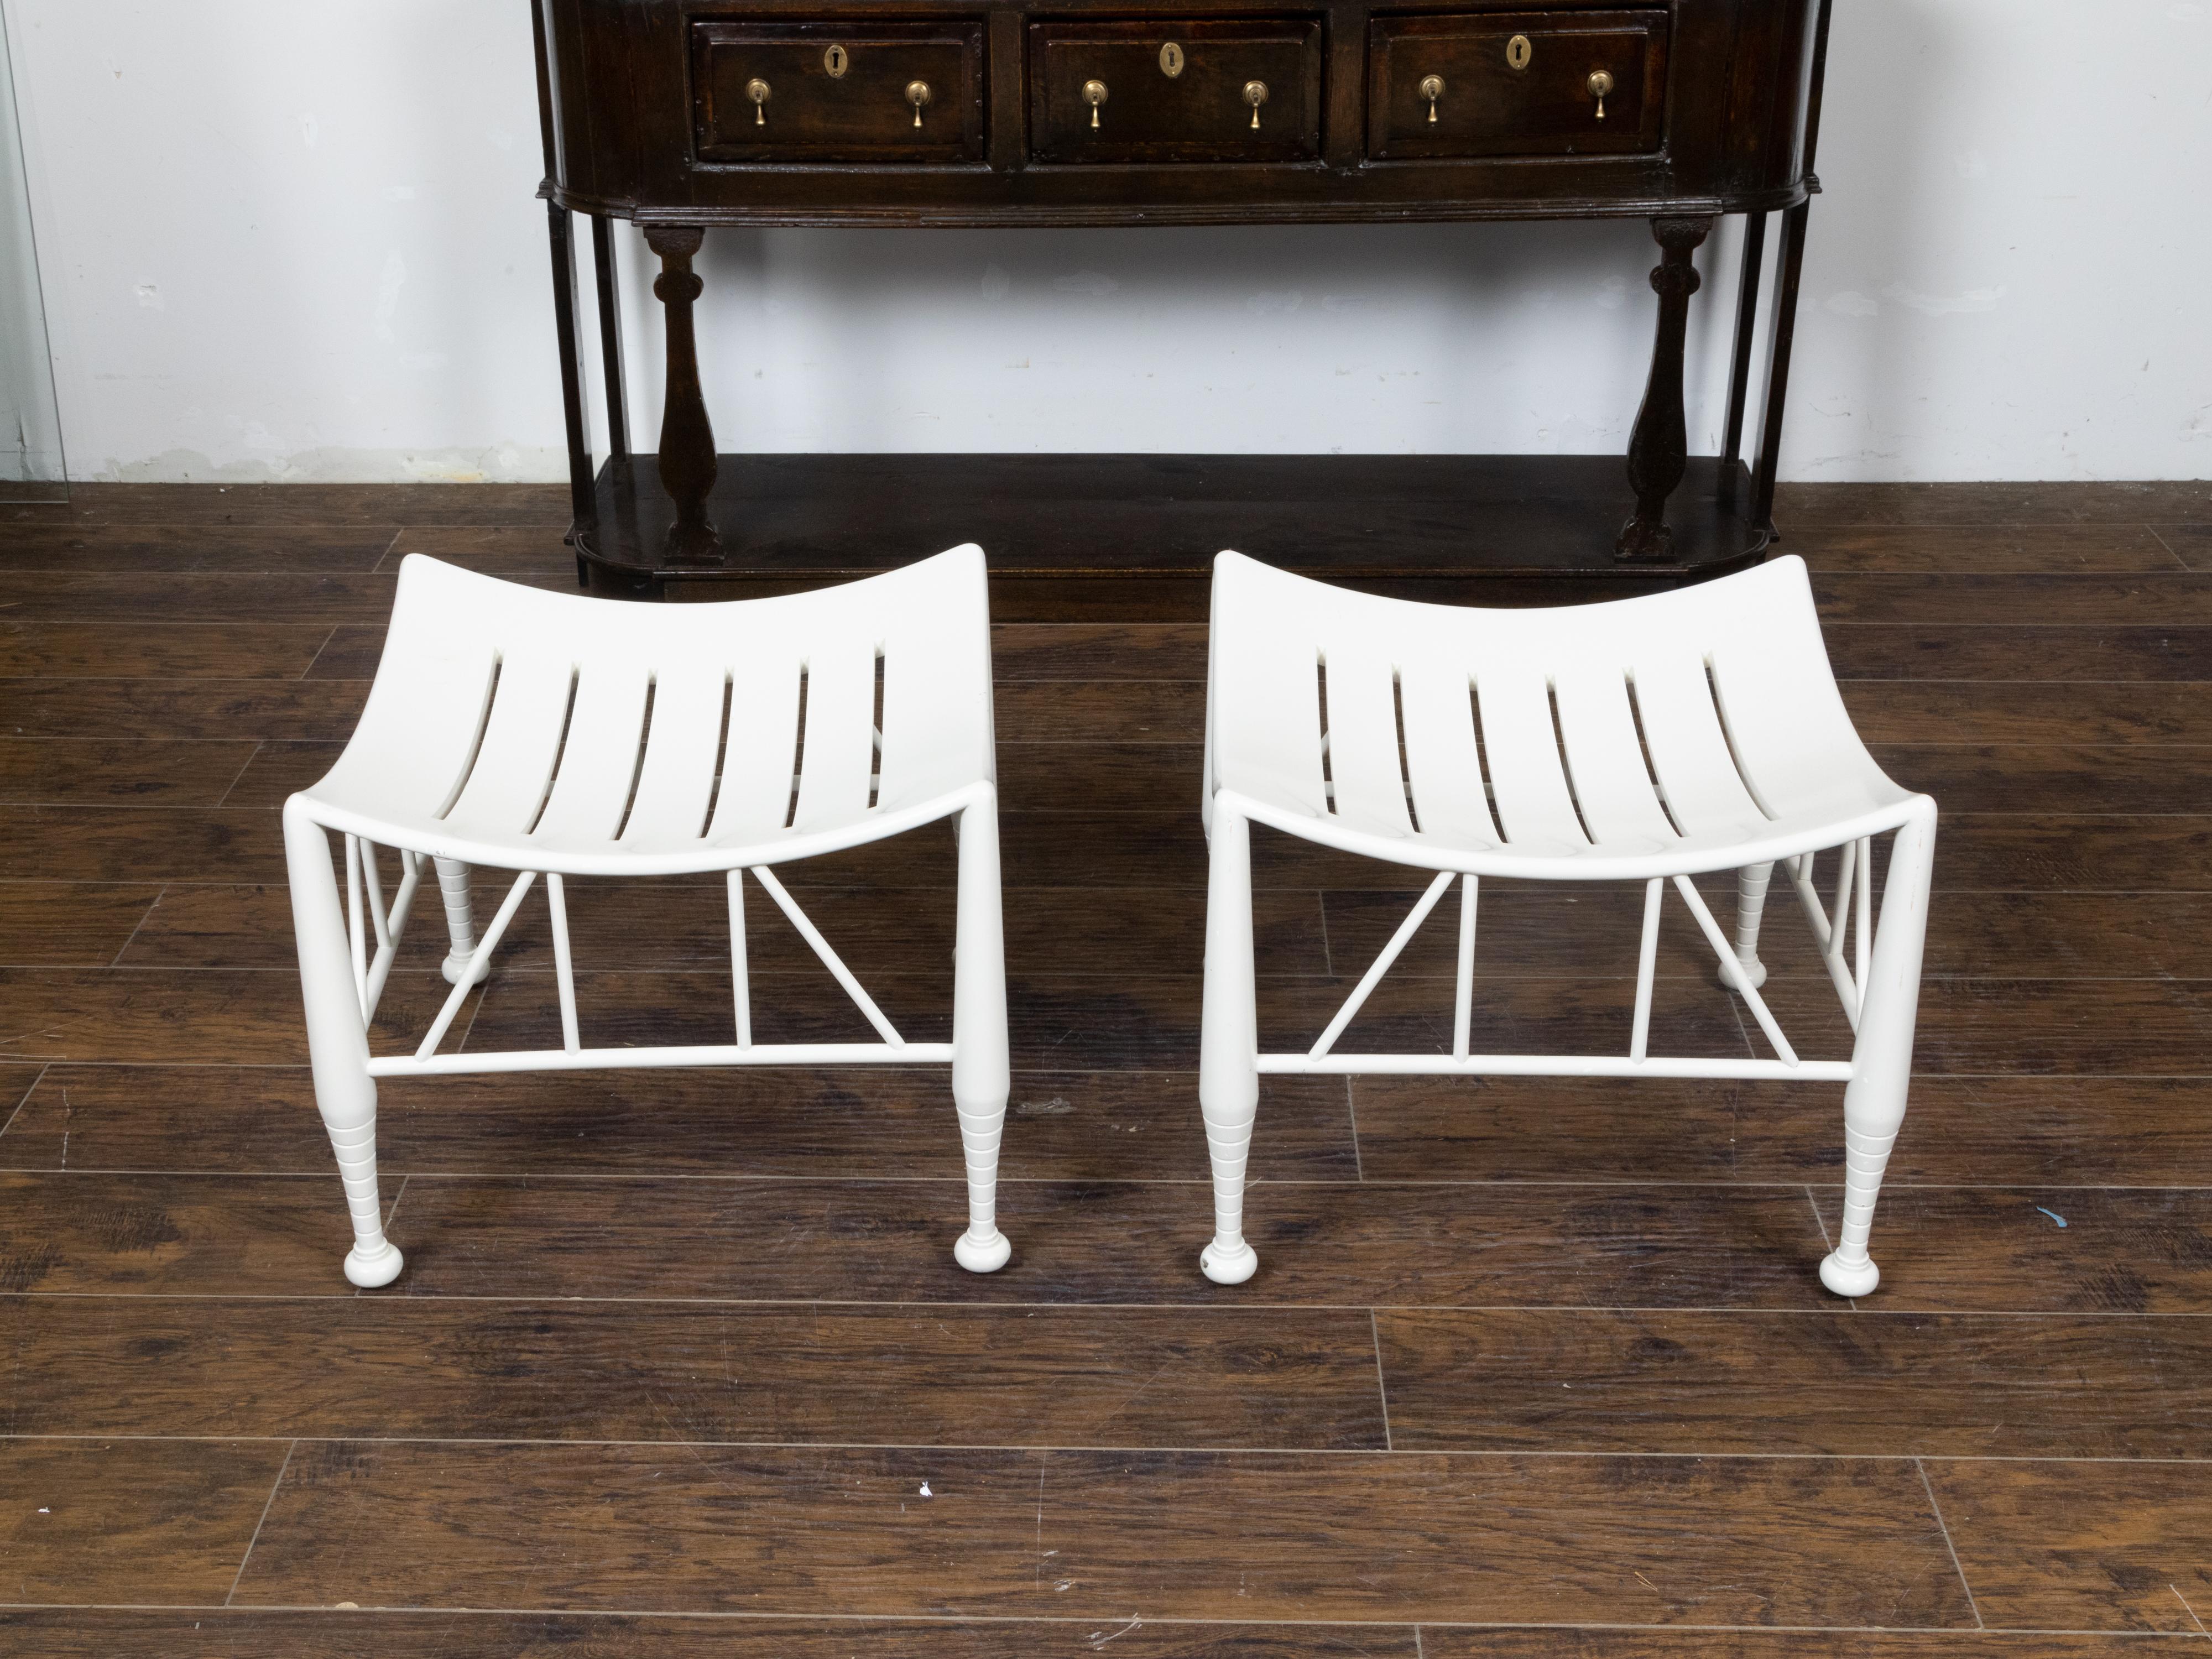 20th Century Pair of Vintage English Egyptian Revival White Thebes Stools with Curving Seats For Sale